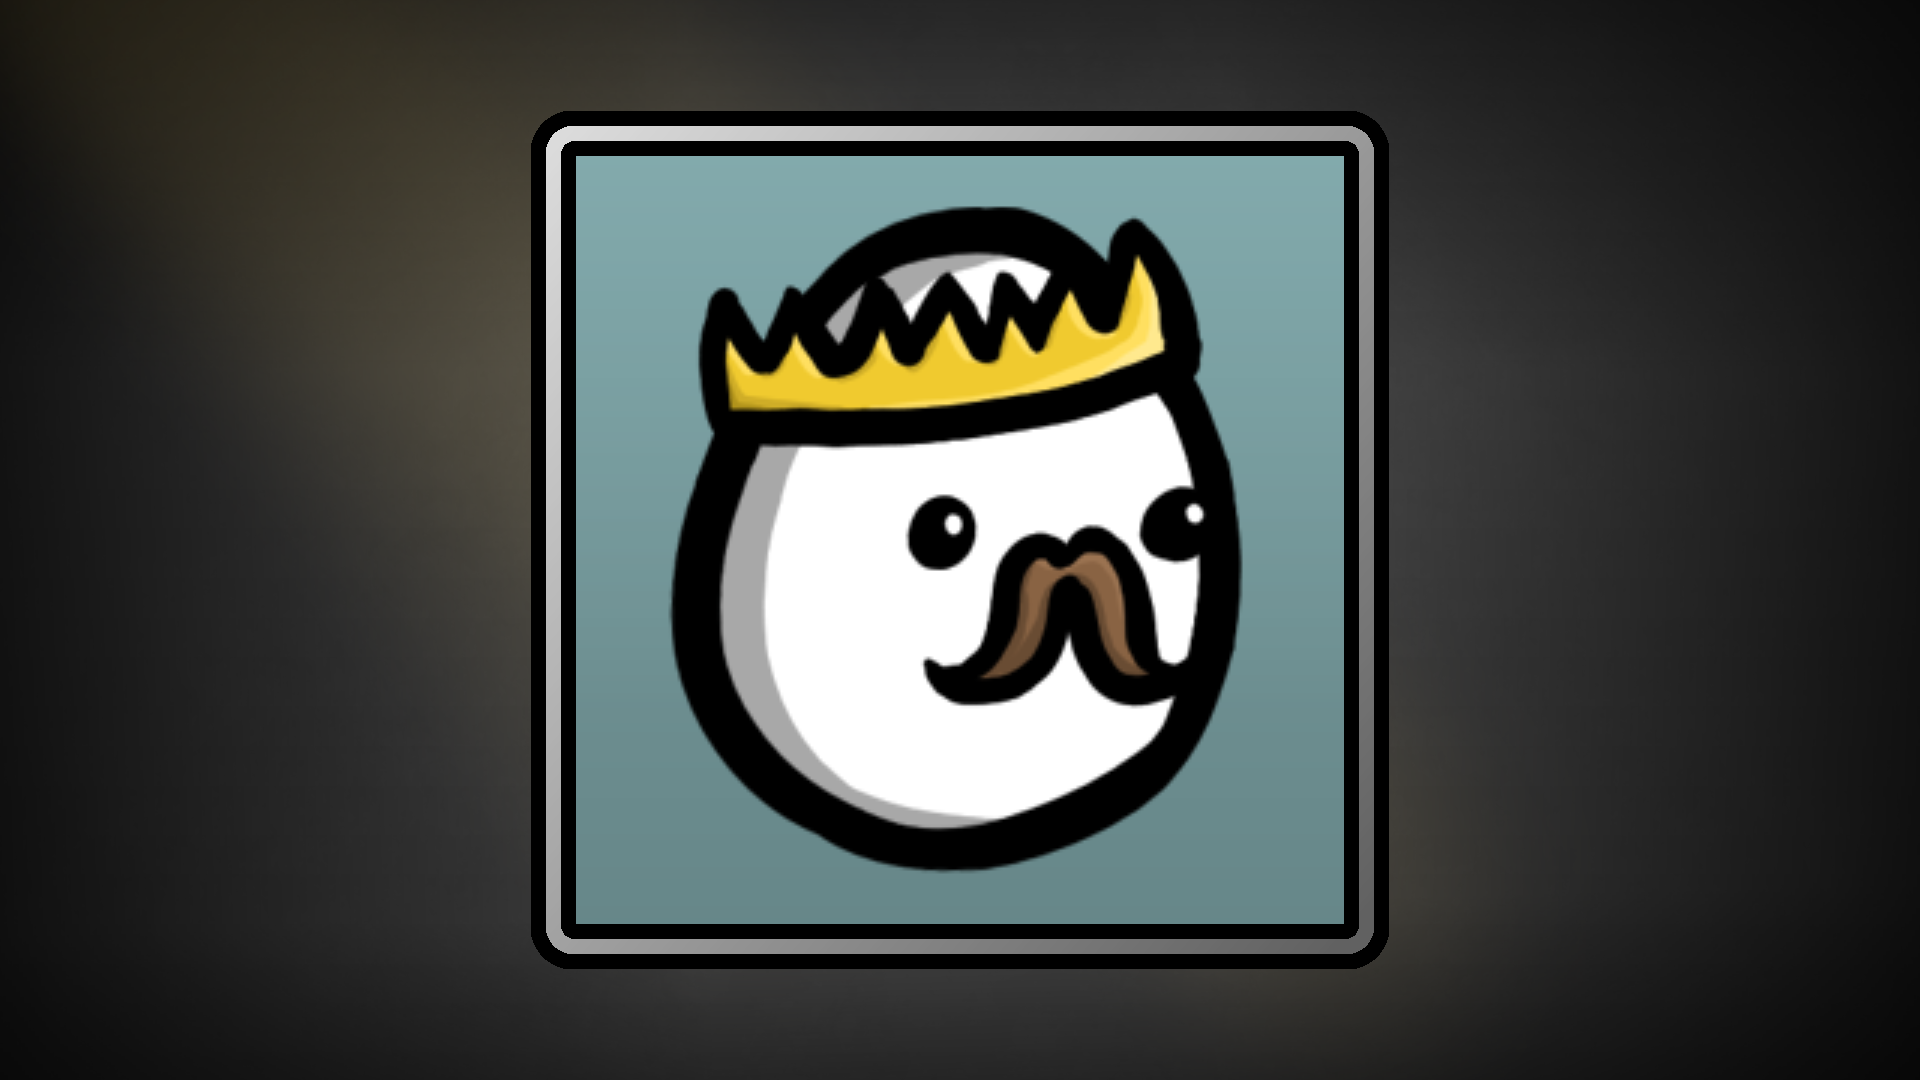 Icon for King